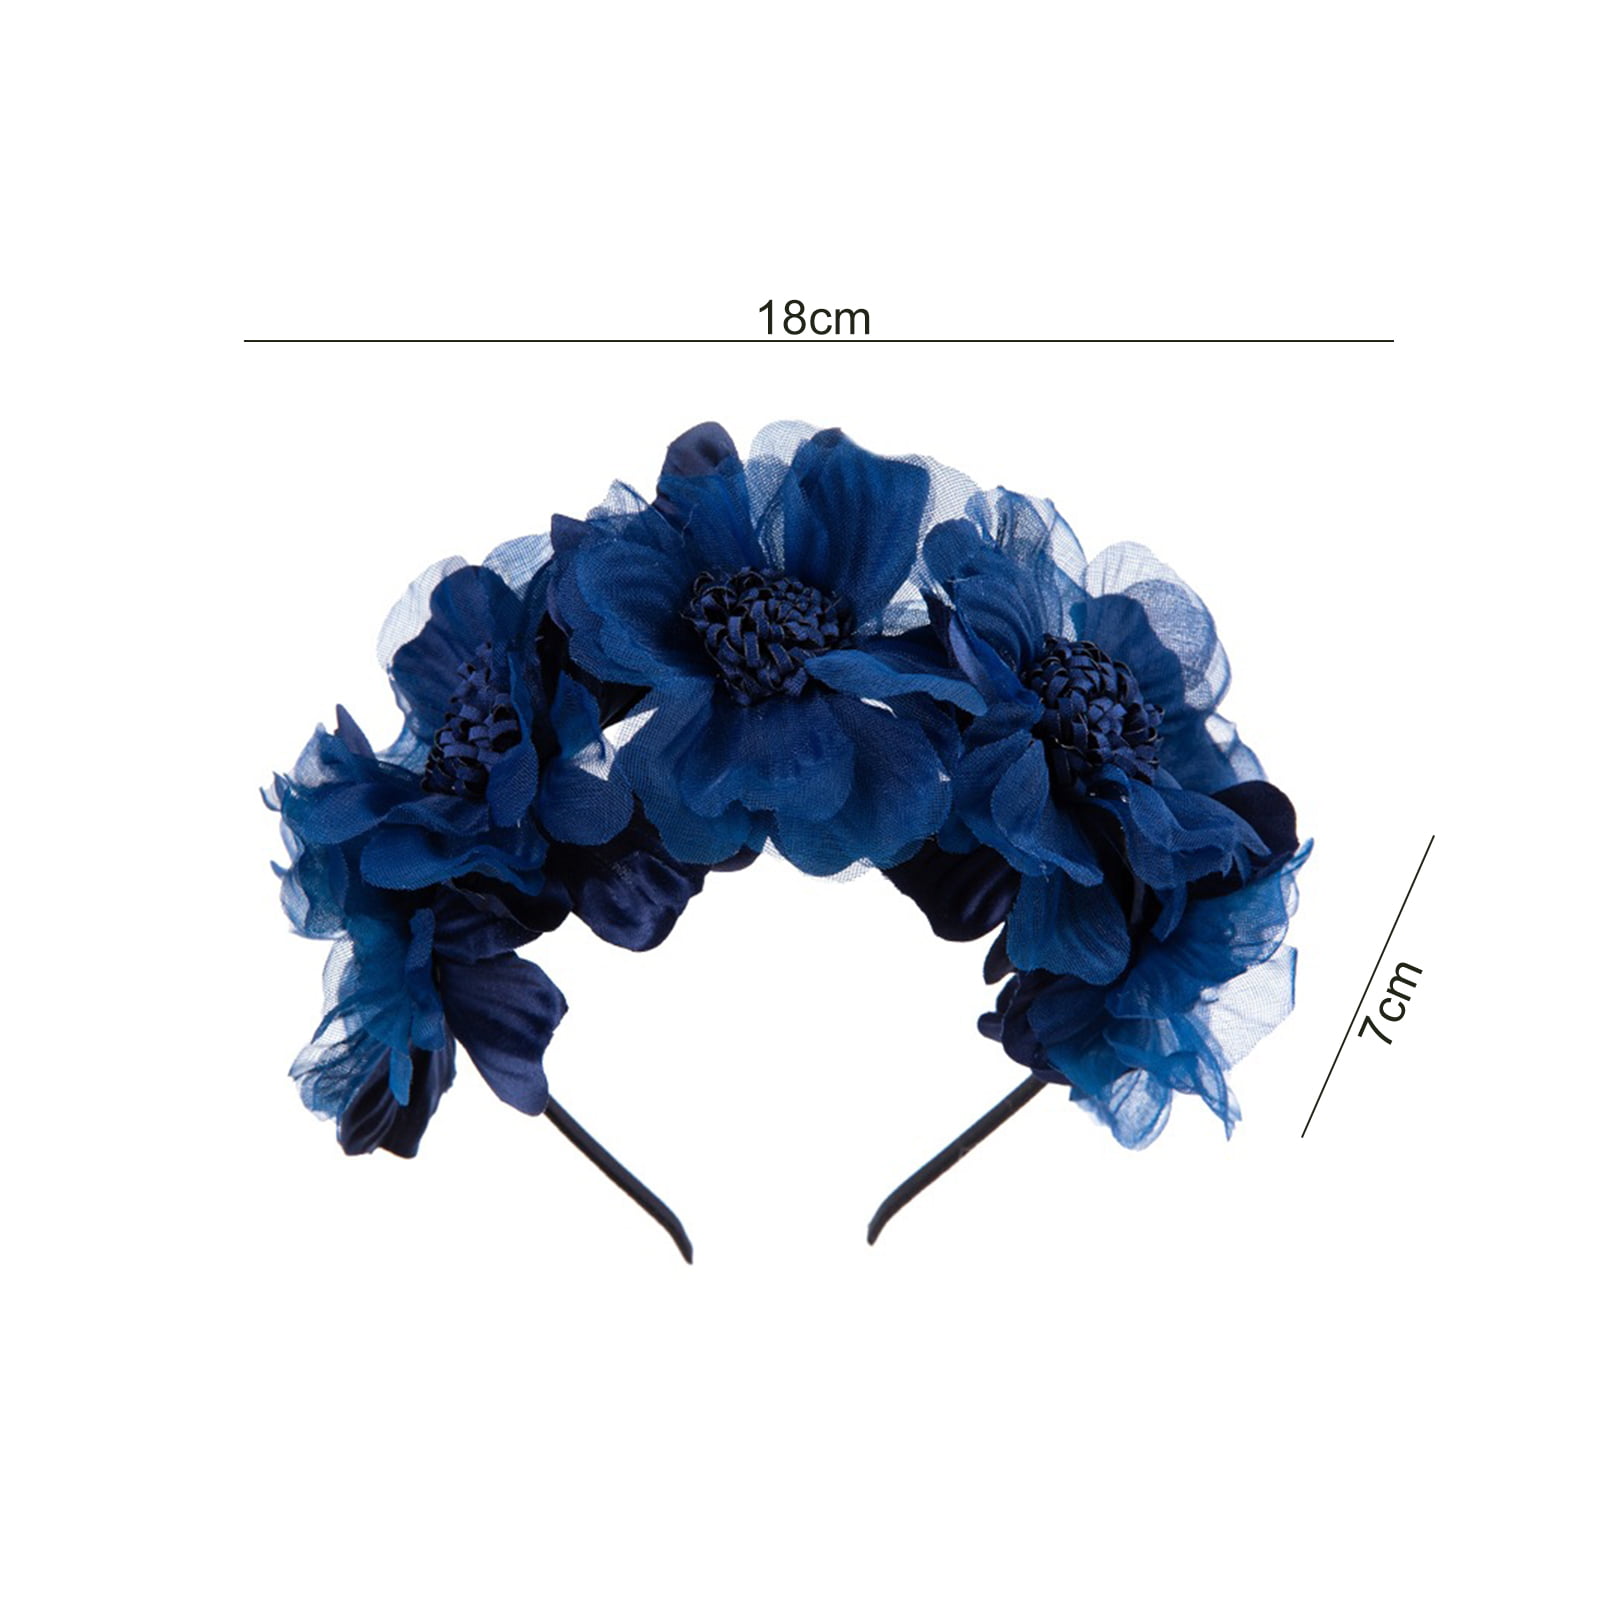  1 Roll Wedding Day Bag Hair Wave Flower Gifts Baby Decorate  Daily use Wired Corona para Ramos buchones de Flores Gift Bag Edge Trim  Blue Ribbon Packing Supplies Gift Wreath 